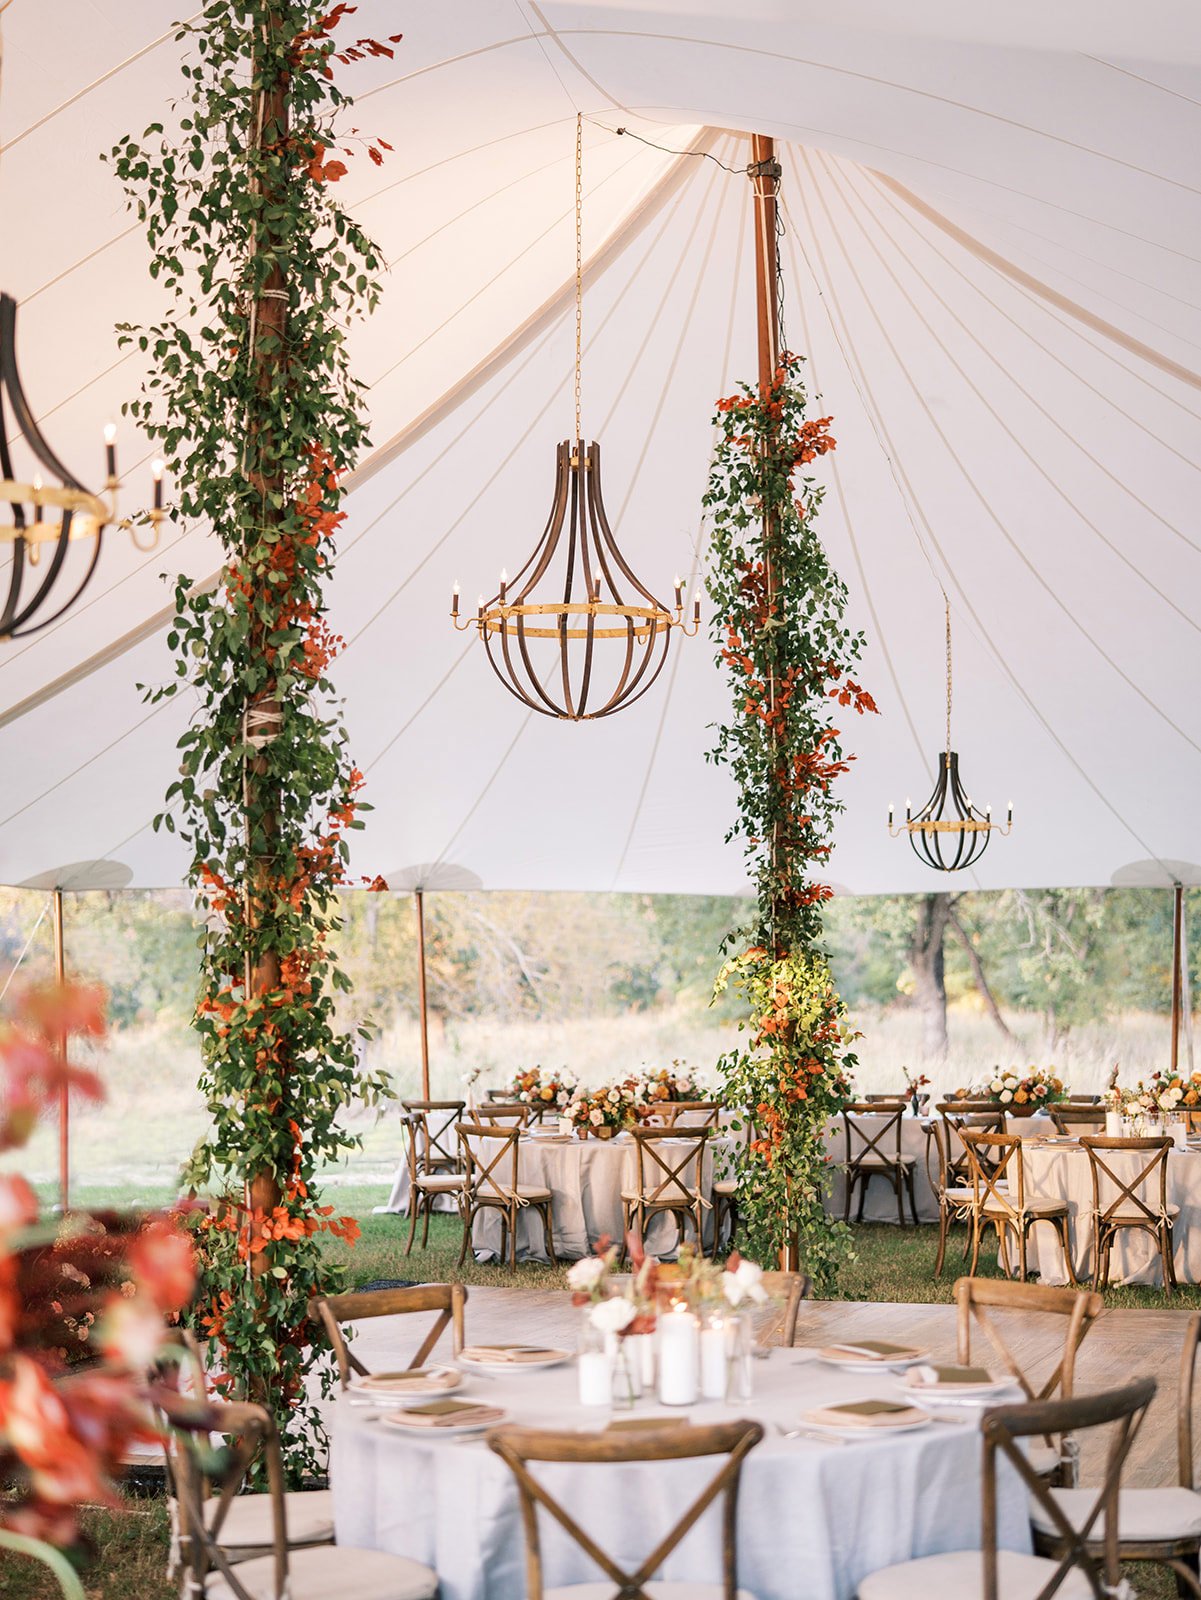 Sailcloth wedding tent with black chandeliers and greenery on posts designed by Ranch wedding planner Shannon Rose Events